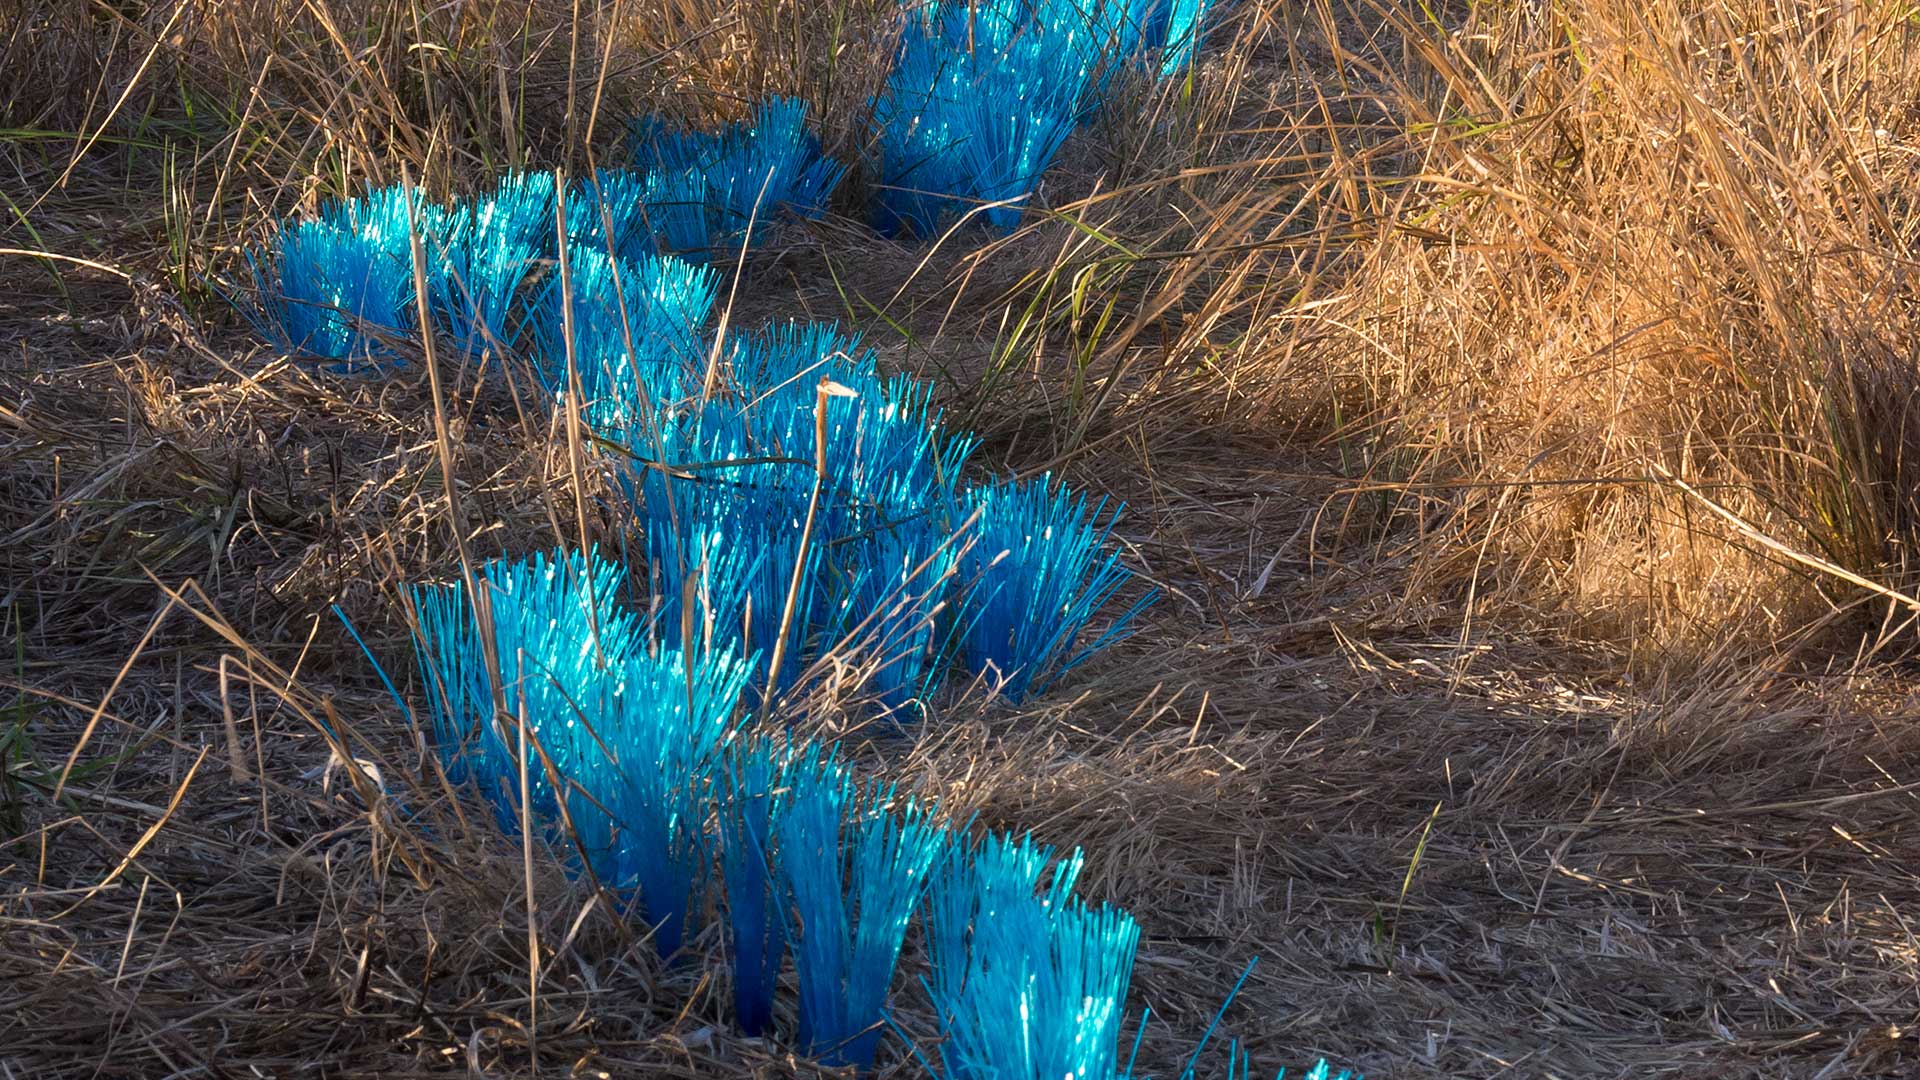 Close-up view of the temporary Land Art Installation at Cooley Landing